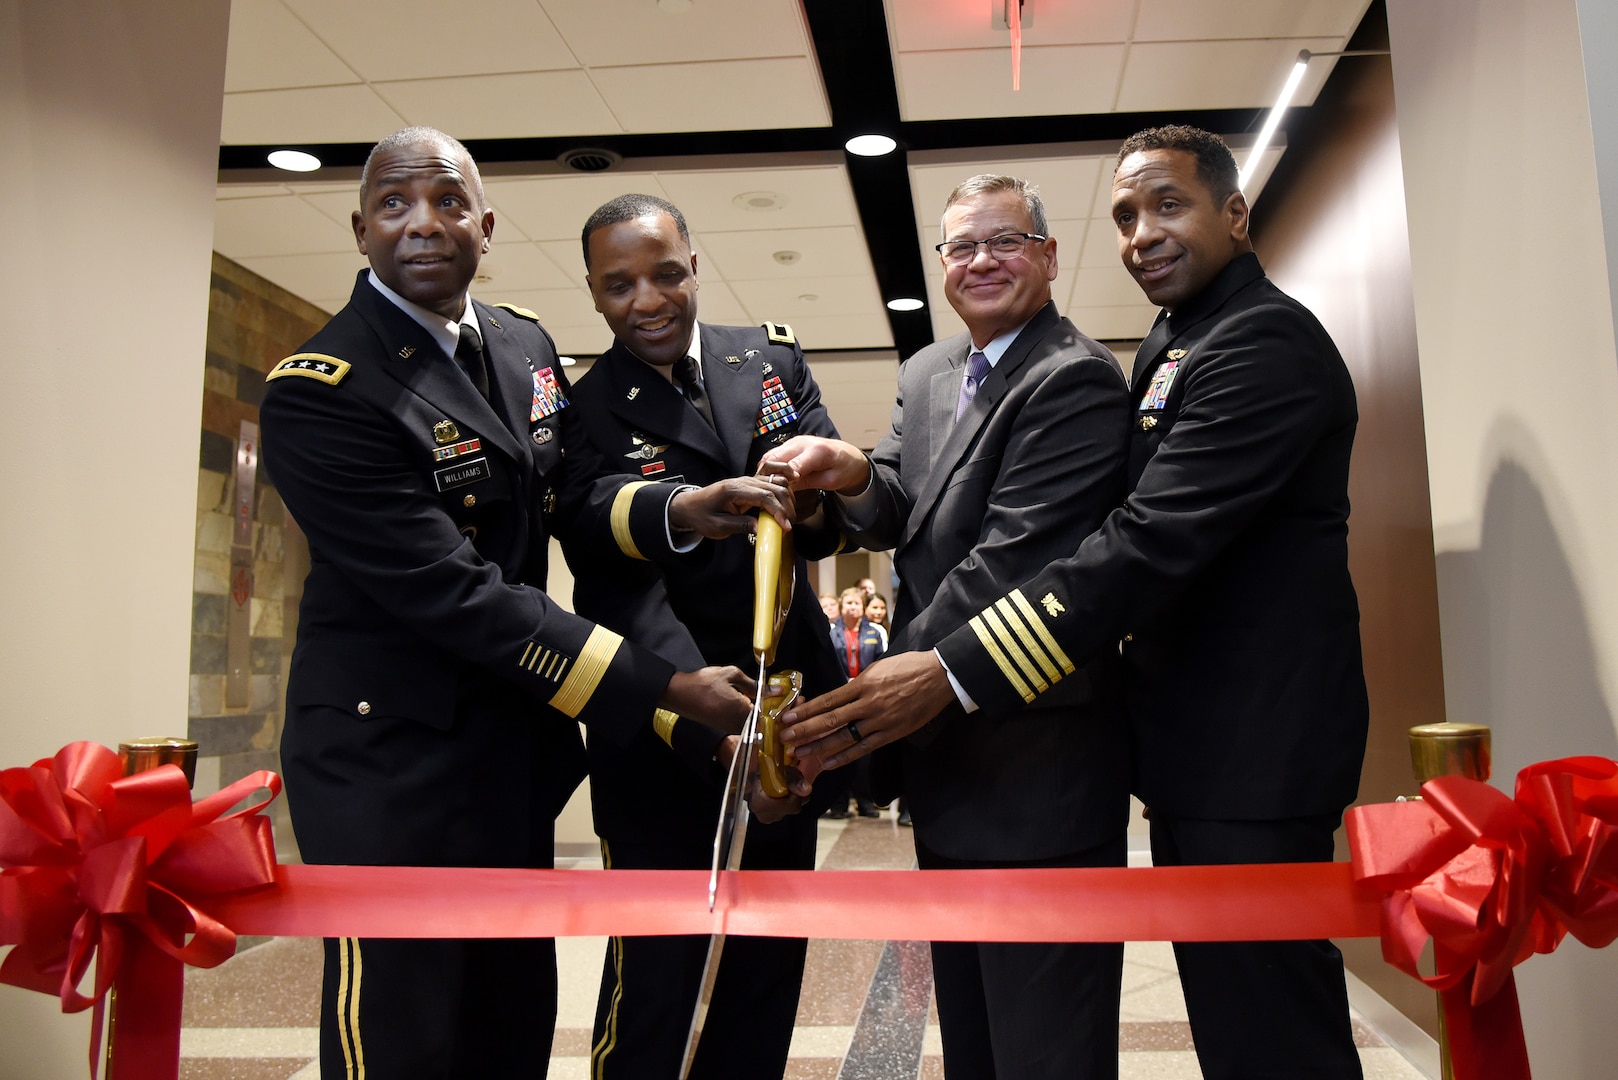 The Defense Logistics Agency Troop Support celebrated the opening of its new headquarters building in Philadelphia during a ribbon cutting ceremony on Dec. 10, 2019. Pictured are, from the left, Army Lt. Gen. Darrell Williams, director, Defense Logistics Agency (DLA); Army Brig. Gen. Gavin Lawrence, commander, DLA Troop Support; Richard Ellis, deputy commander, DLA Troop Support; and Navy Capt. Preston Gill, commanding officer, Naval Support Activity (NSA) Mechanicsburg. (U.S. Navy photo by Mass Communication Specialist 2nd Class Anthony Flynn/Released)